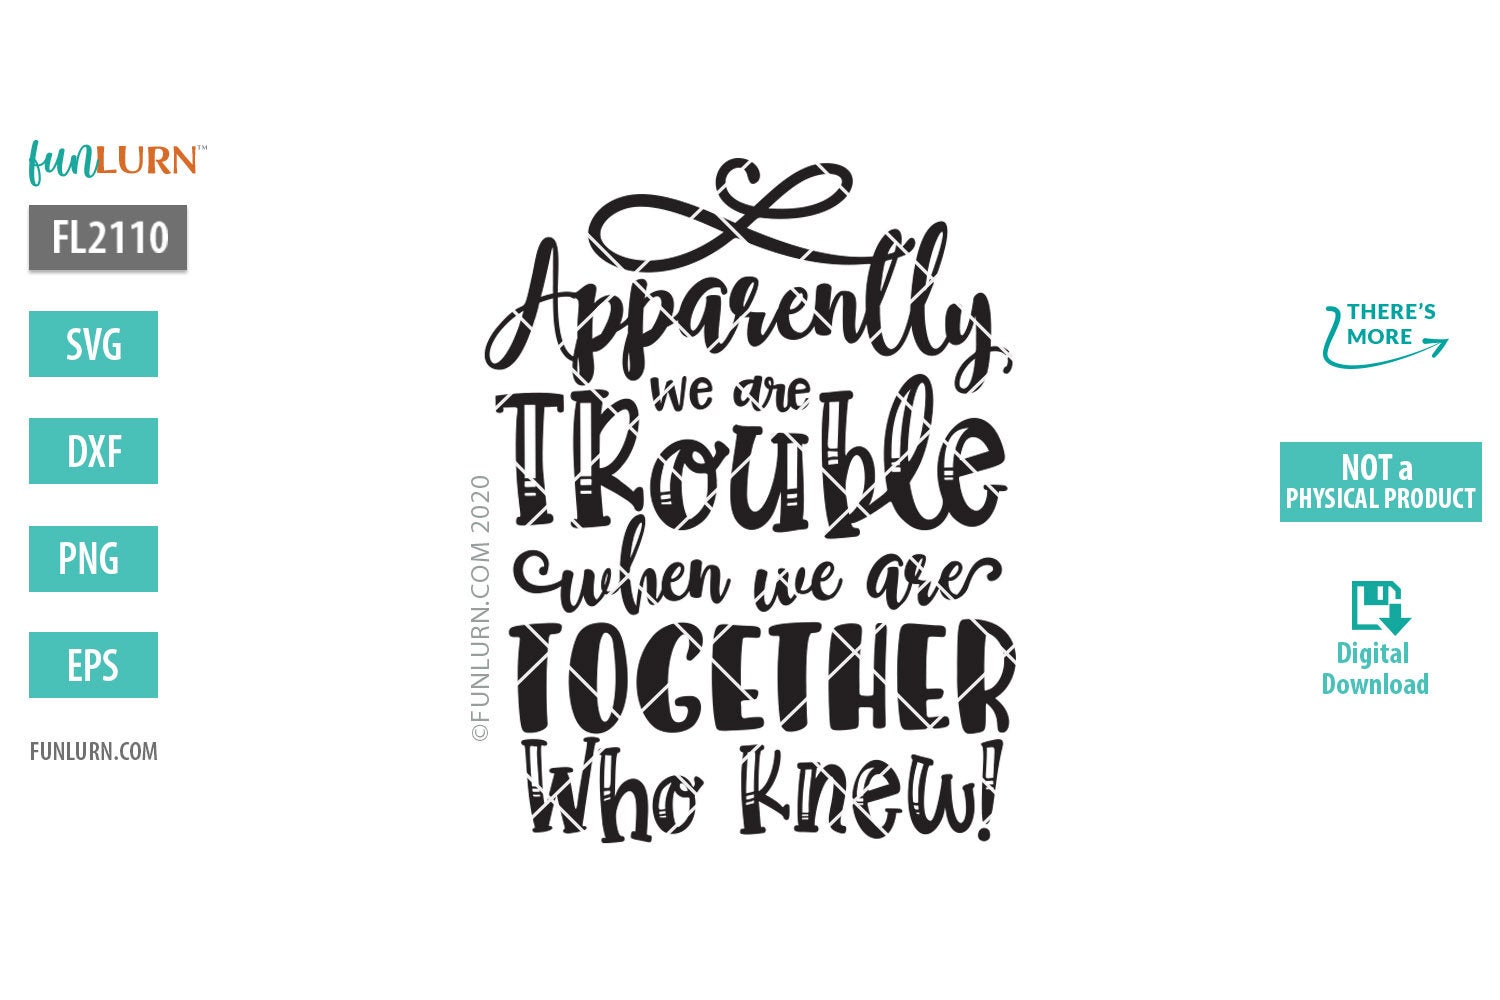 Download Apparently we're trouble when we are together Who knew SVG ...